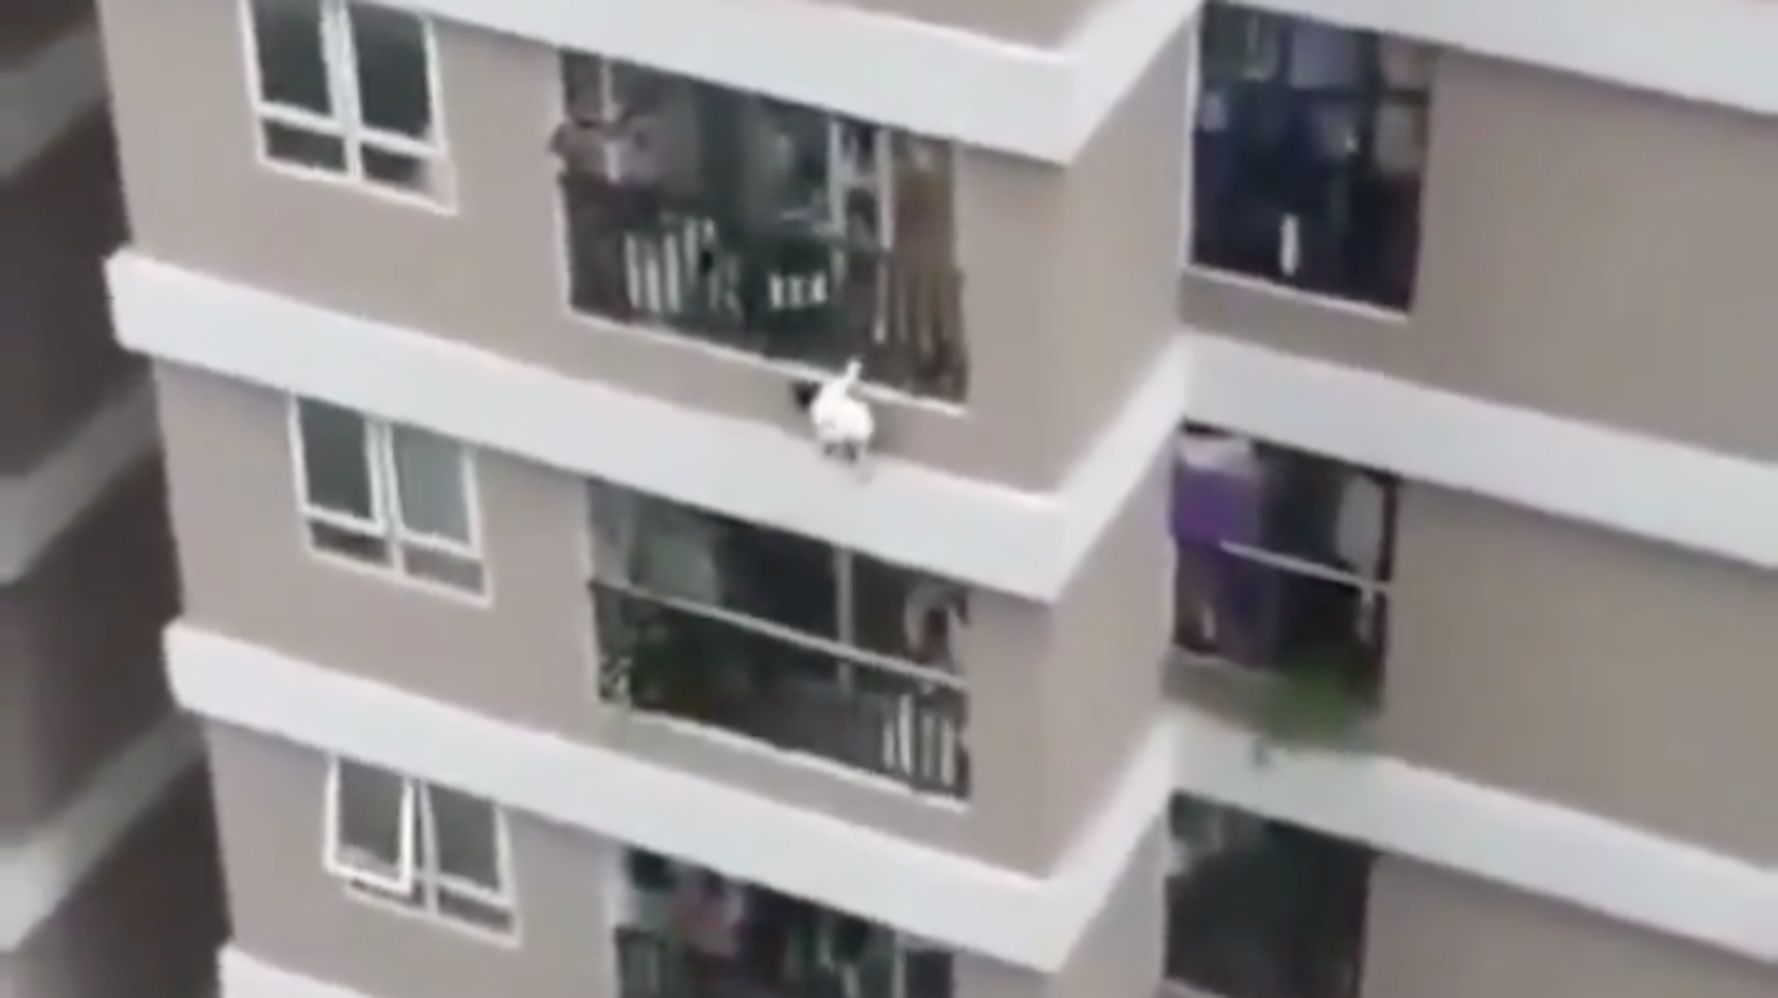 Toddler survives falling from the balcony from the 12th story, thanks to ‘hero’ delivery manager